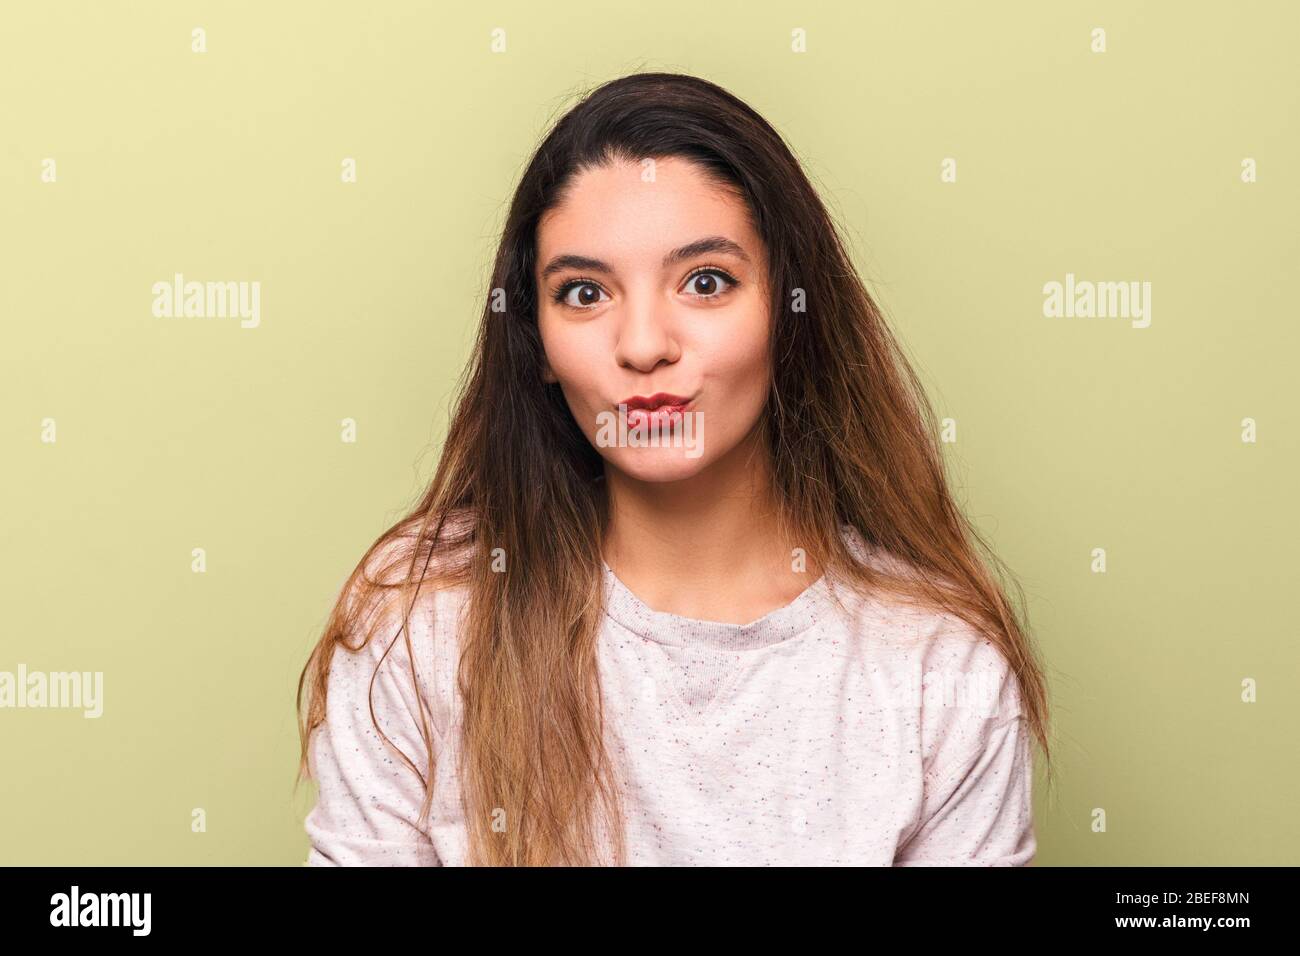 portrait of cheerful young woman brunette with big eyes with black eyeliner  making funny face against yellow background Stock Photo - Alamy